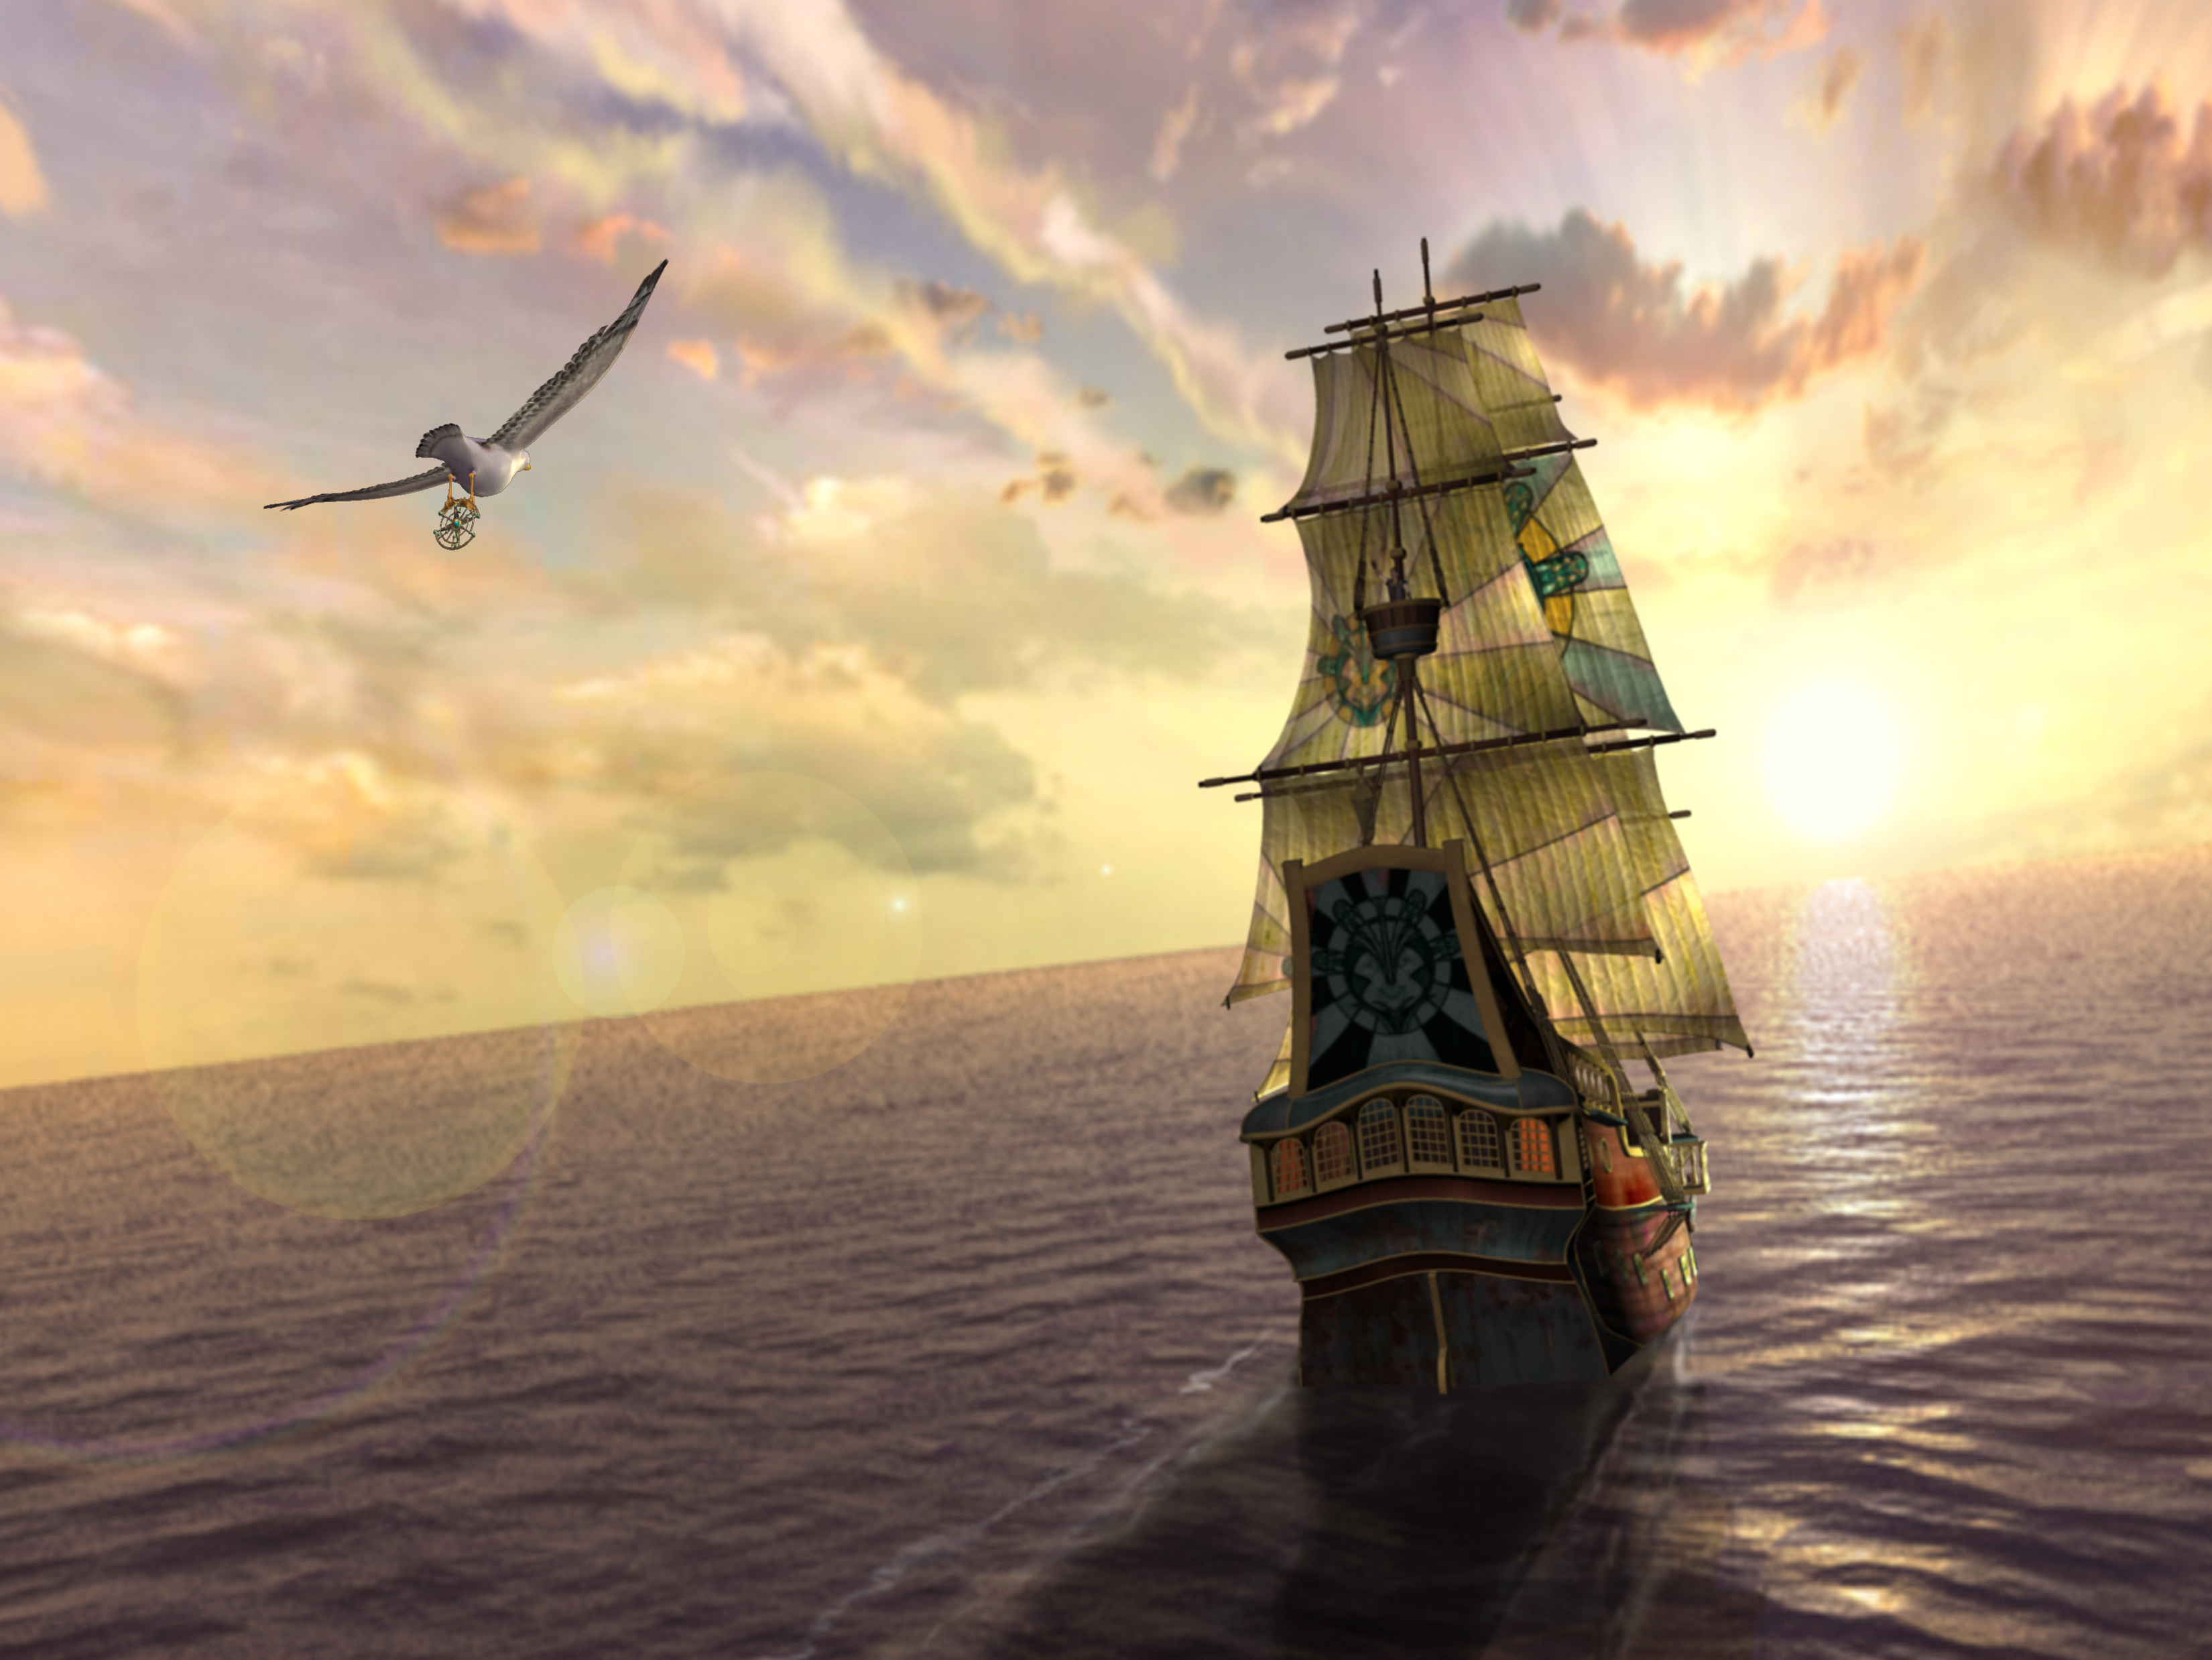 Ship Wallpaper Images in HD Available Here For Download 3300x2476